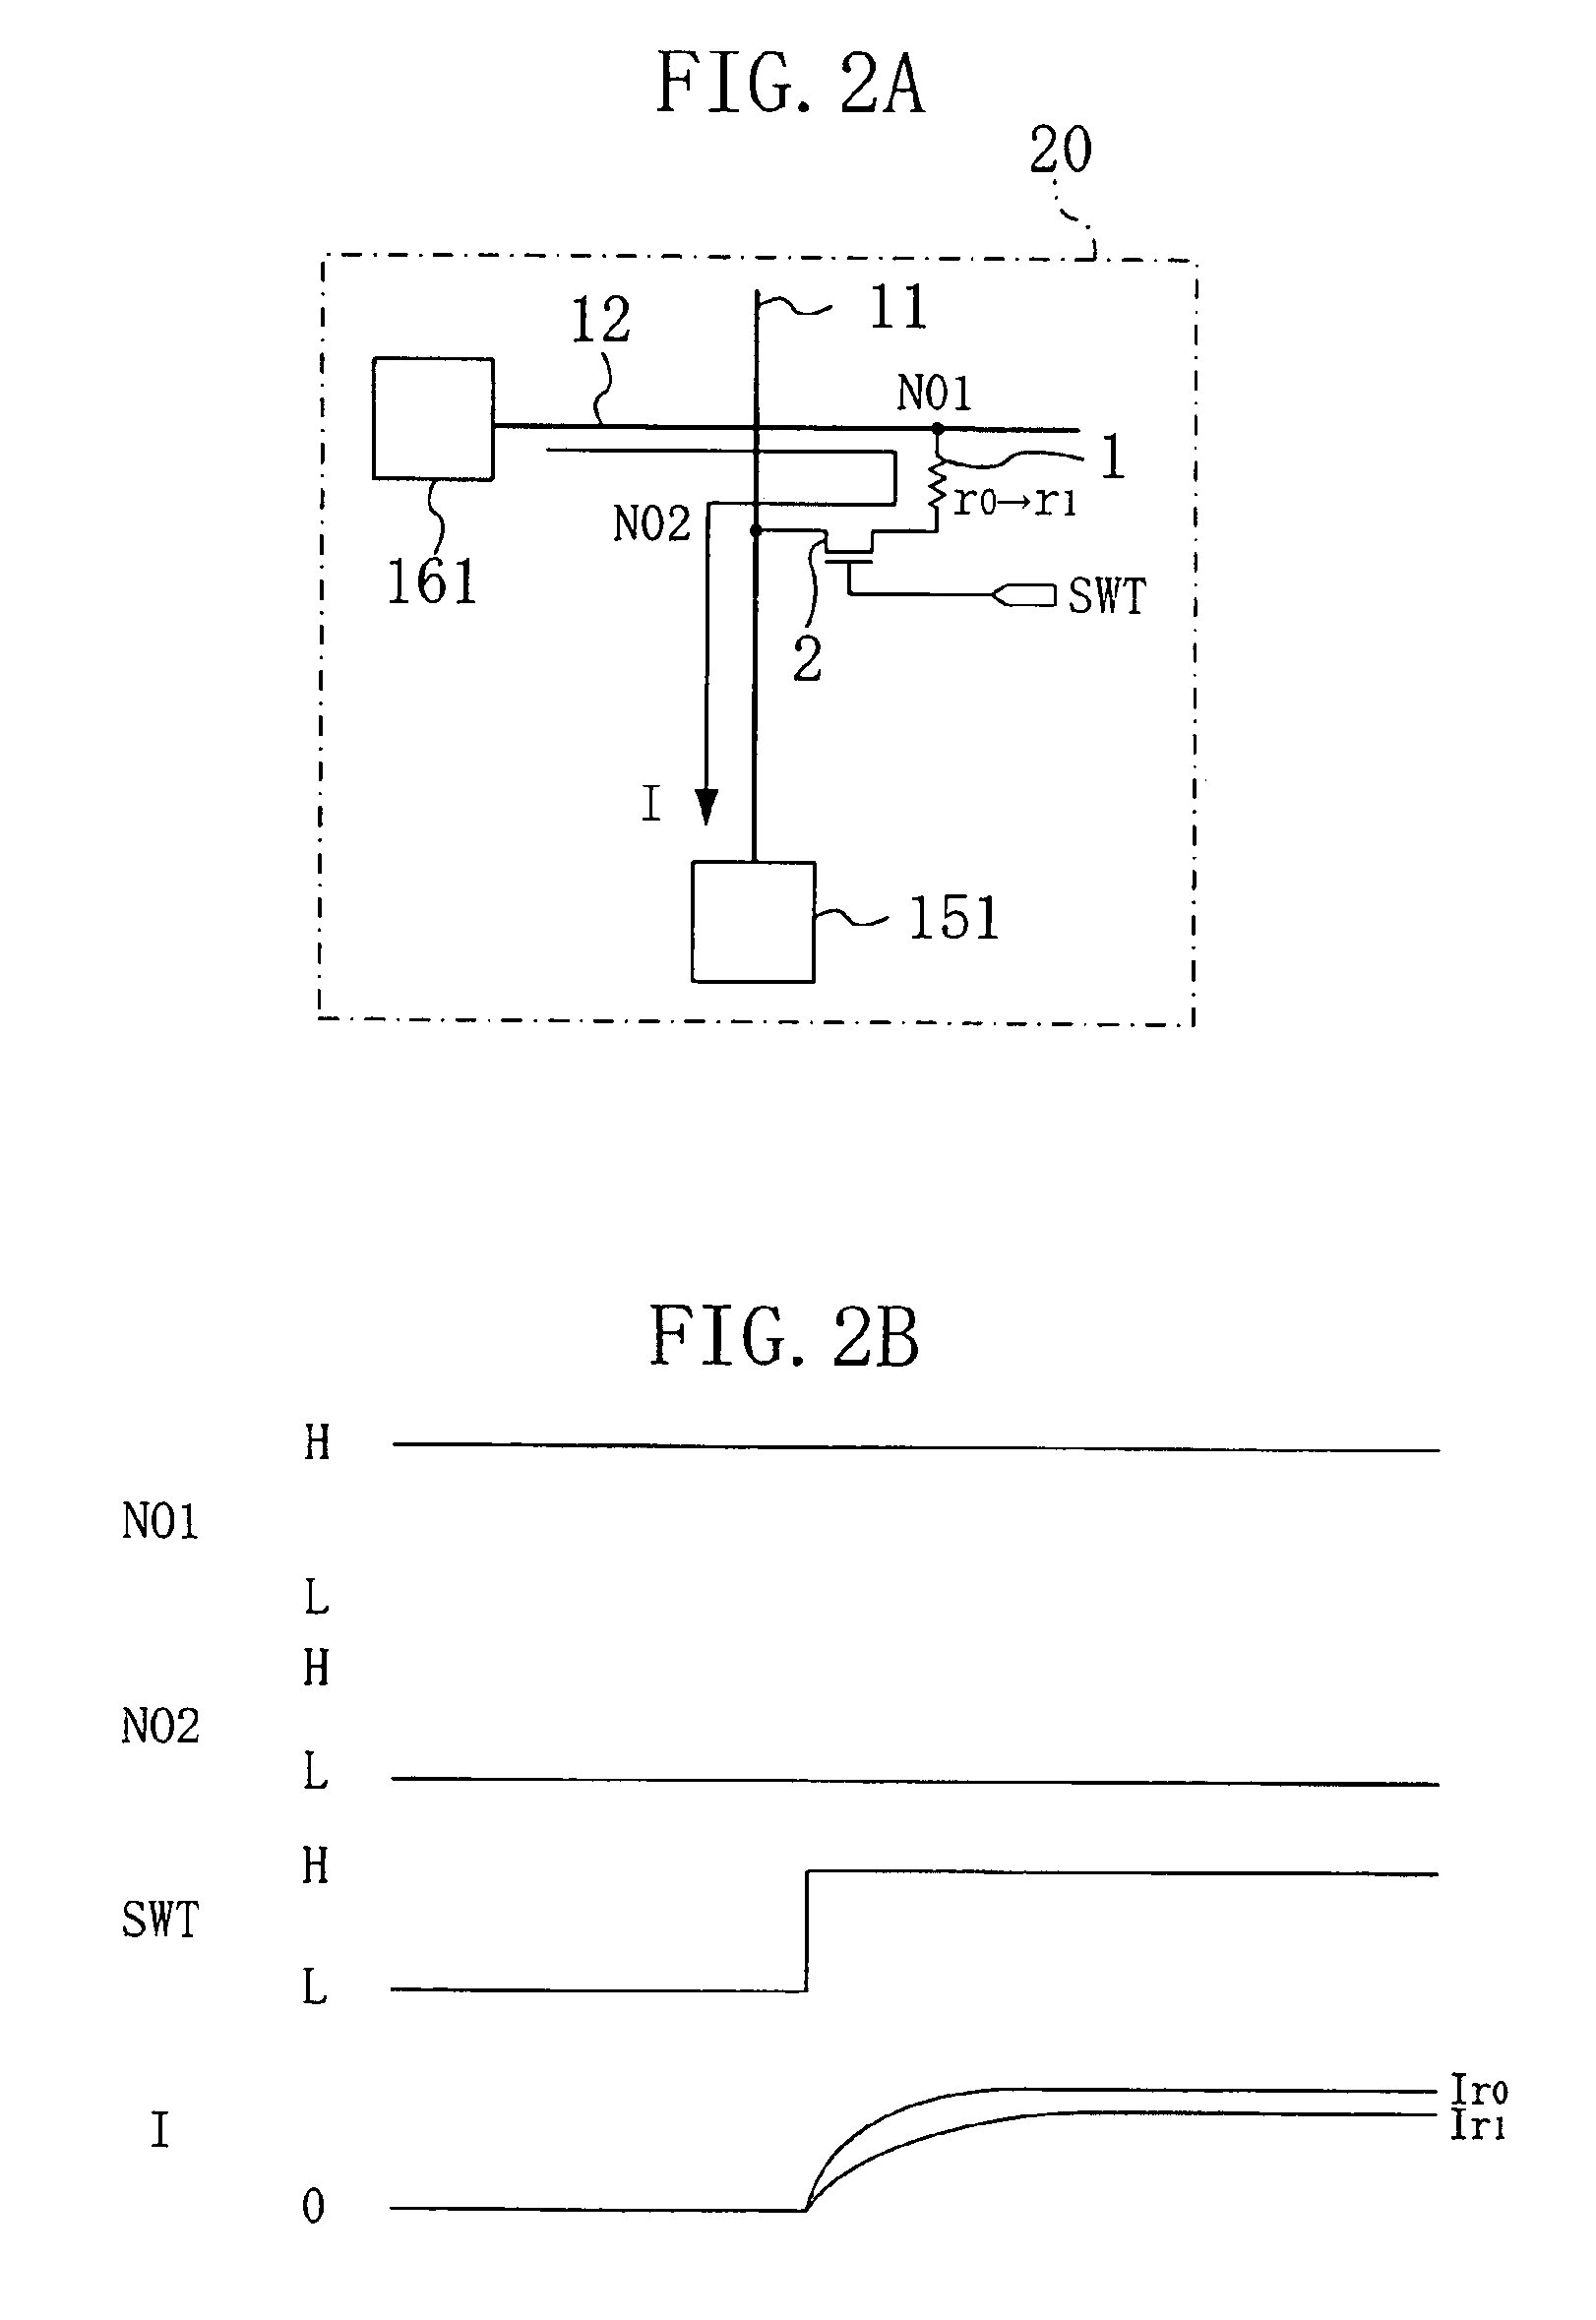 Evaluation device for evaluating semiconductor device